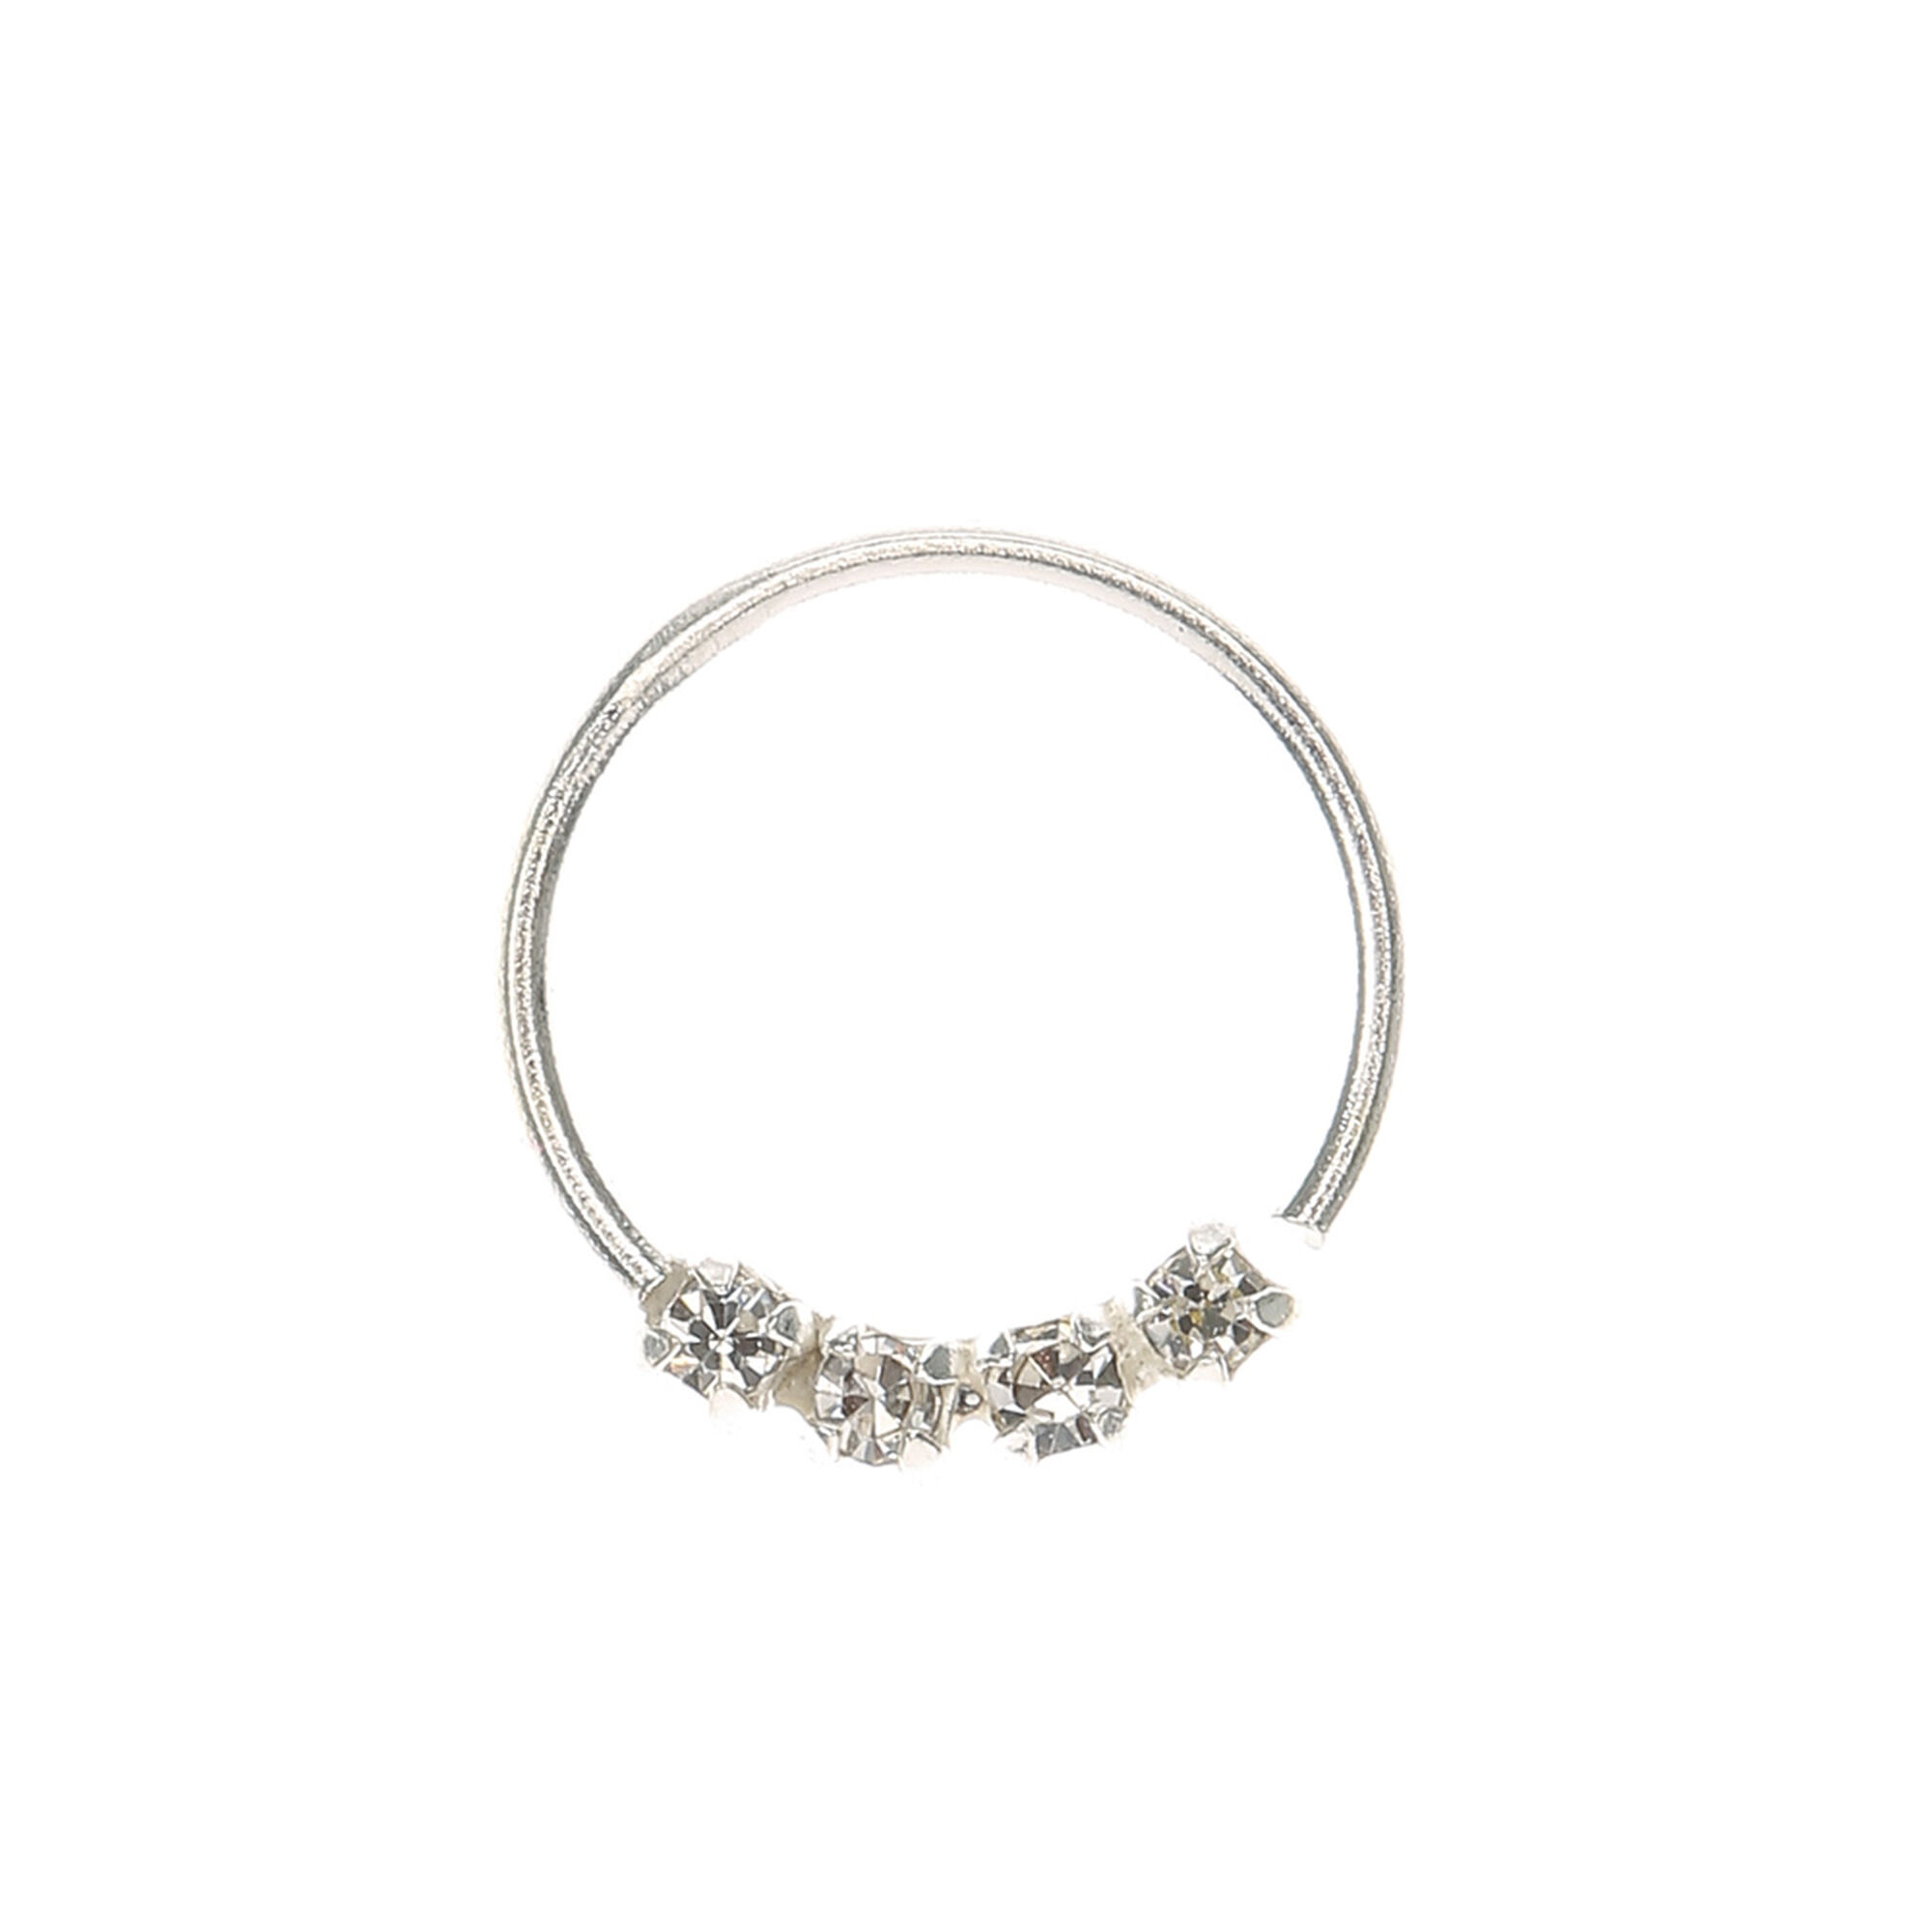 View Claires Crystal Nose Hoop Silver information